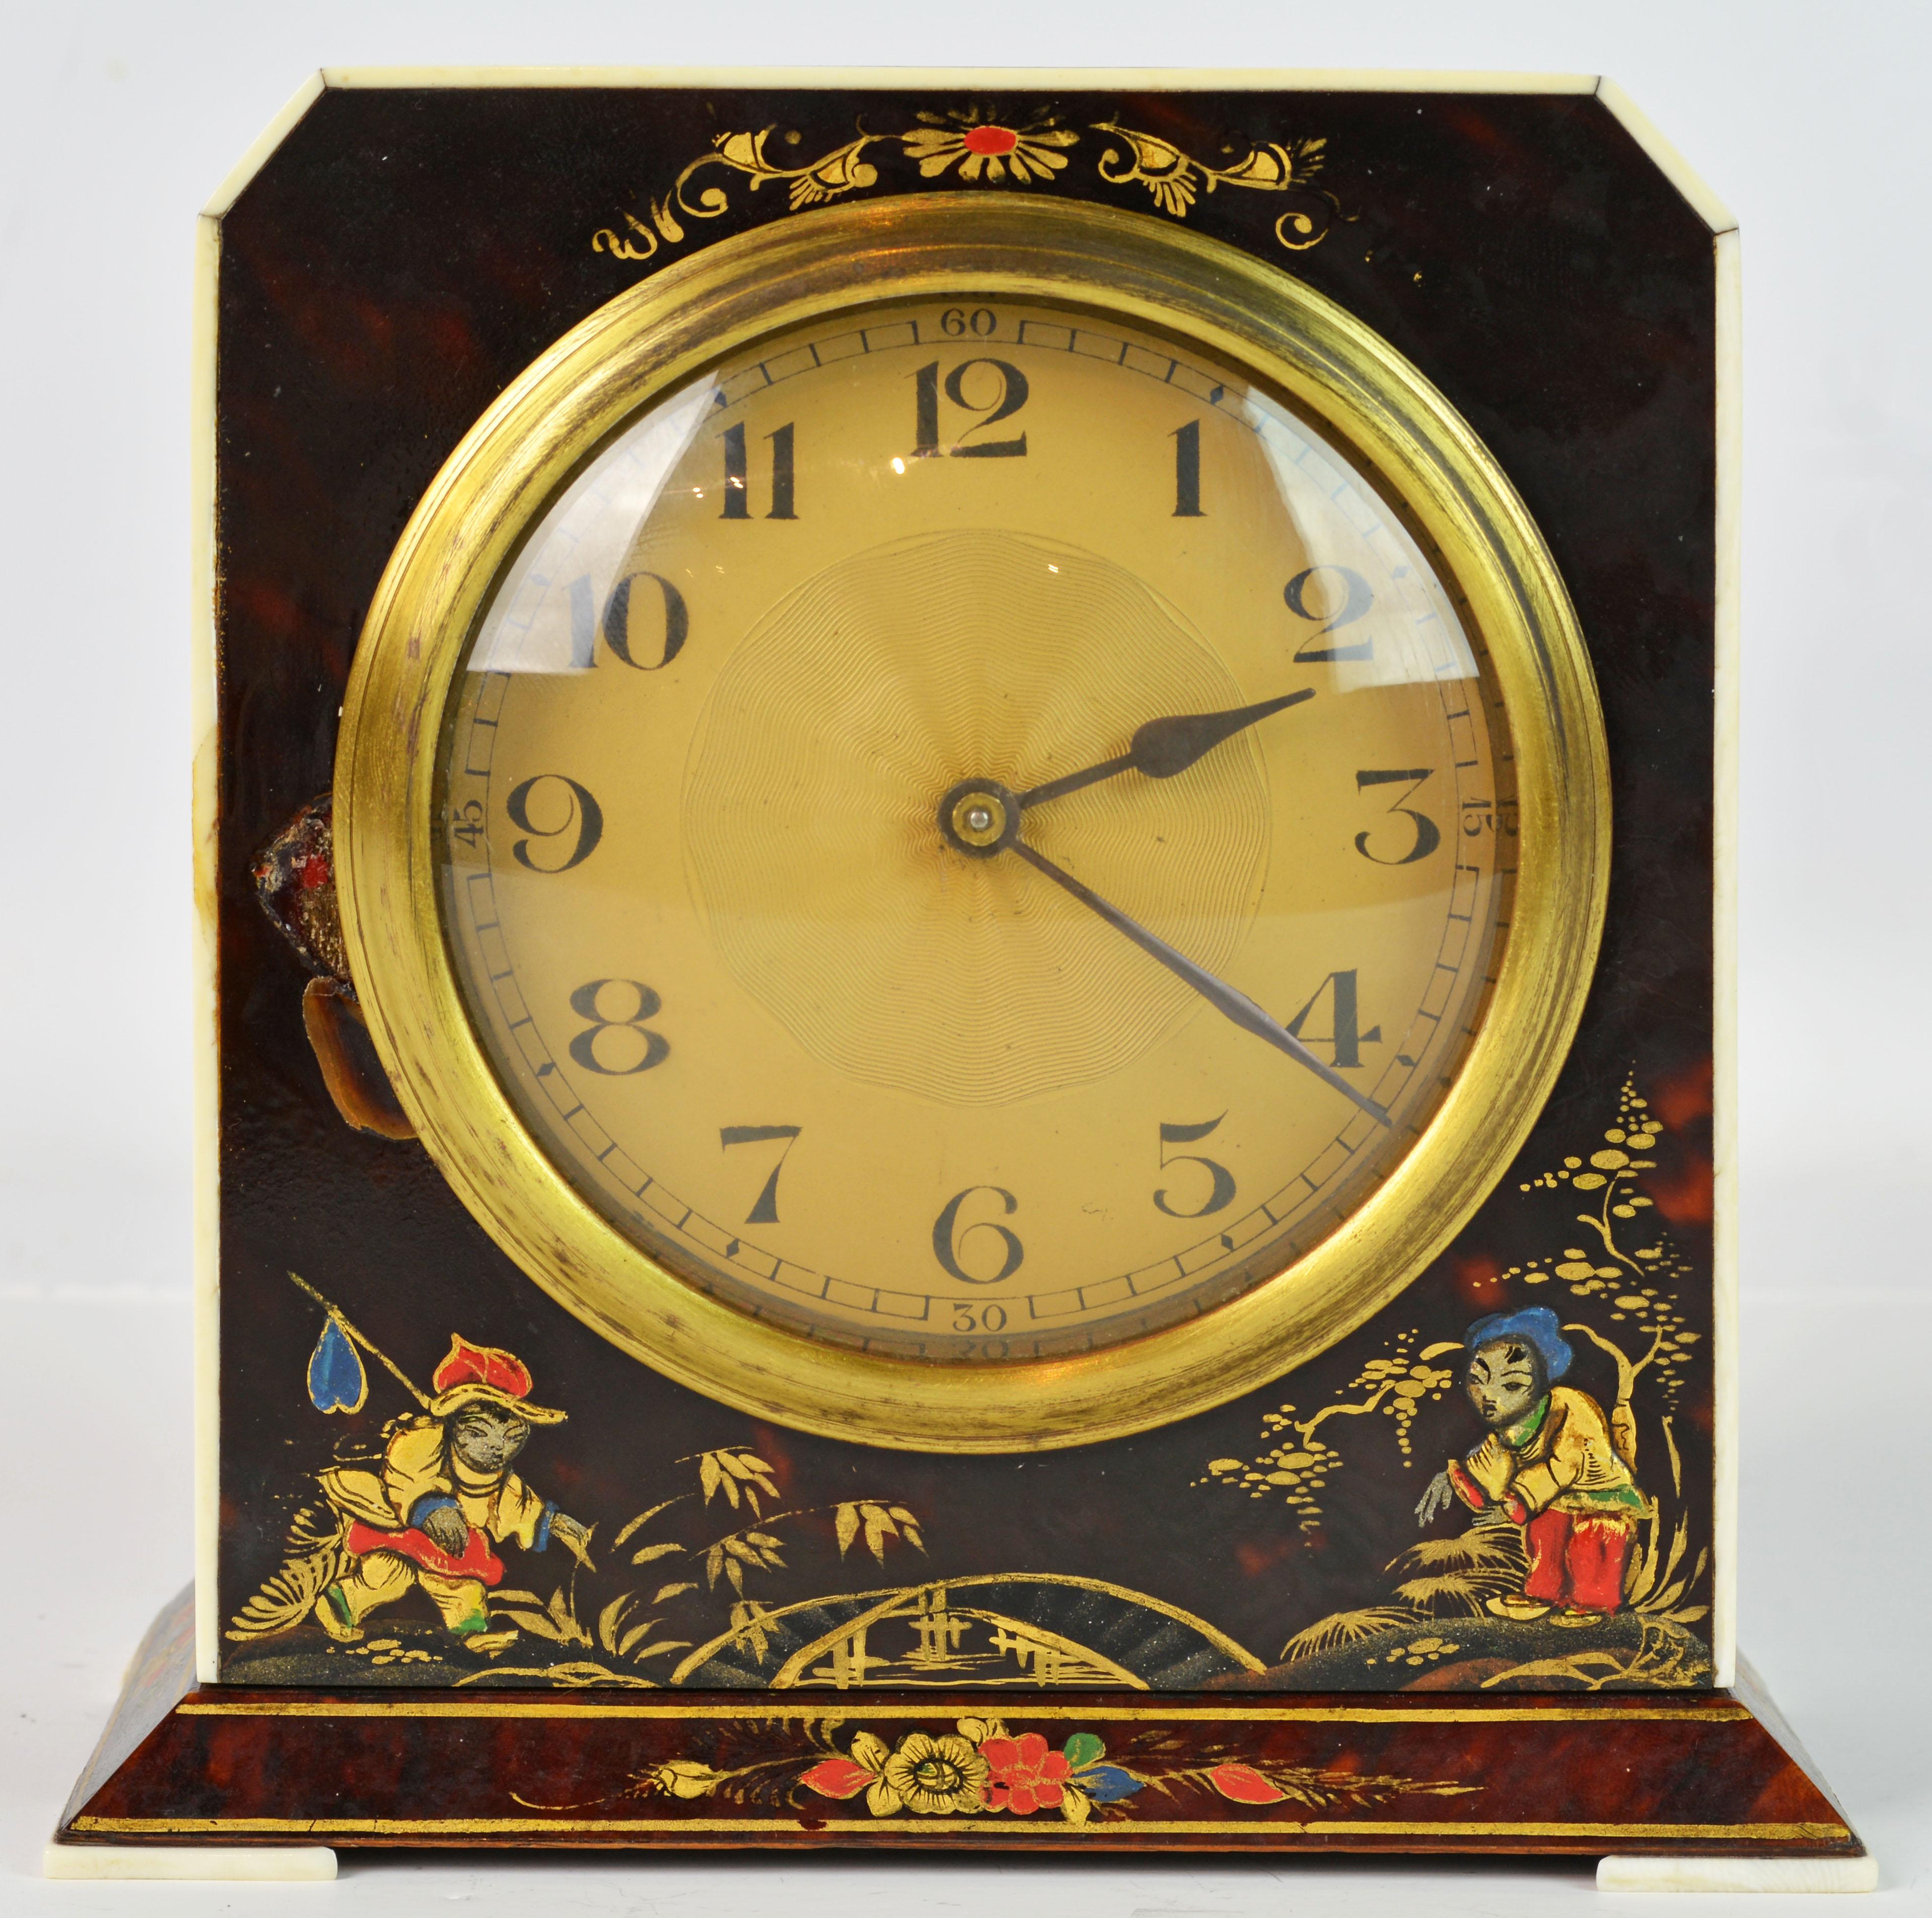 This very stylish clock would have been made in the Art Deco period around 1930. It is made of wood covered with chinoiserie lacquer and gilt decorated tortoise shell with an ivory trim around the front and slices of ivory for feet on each corner of